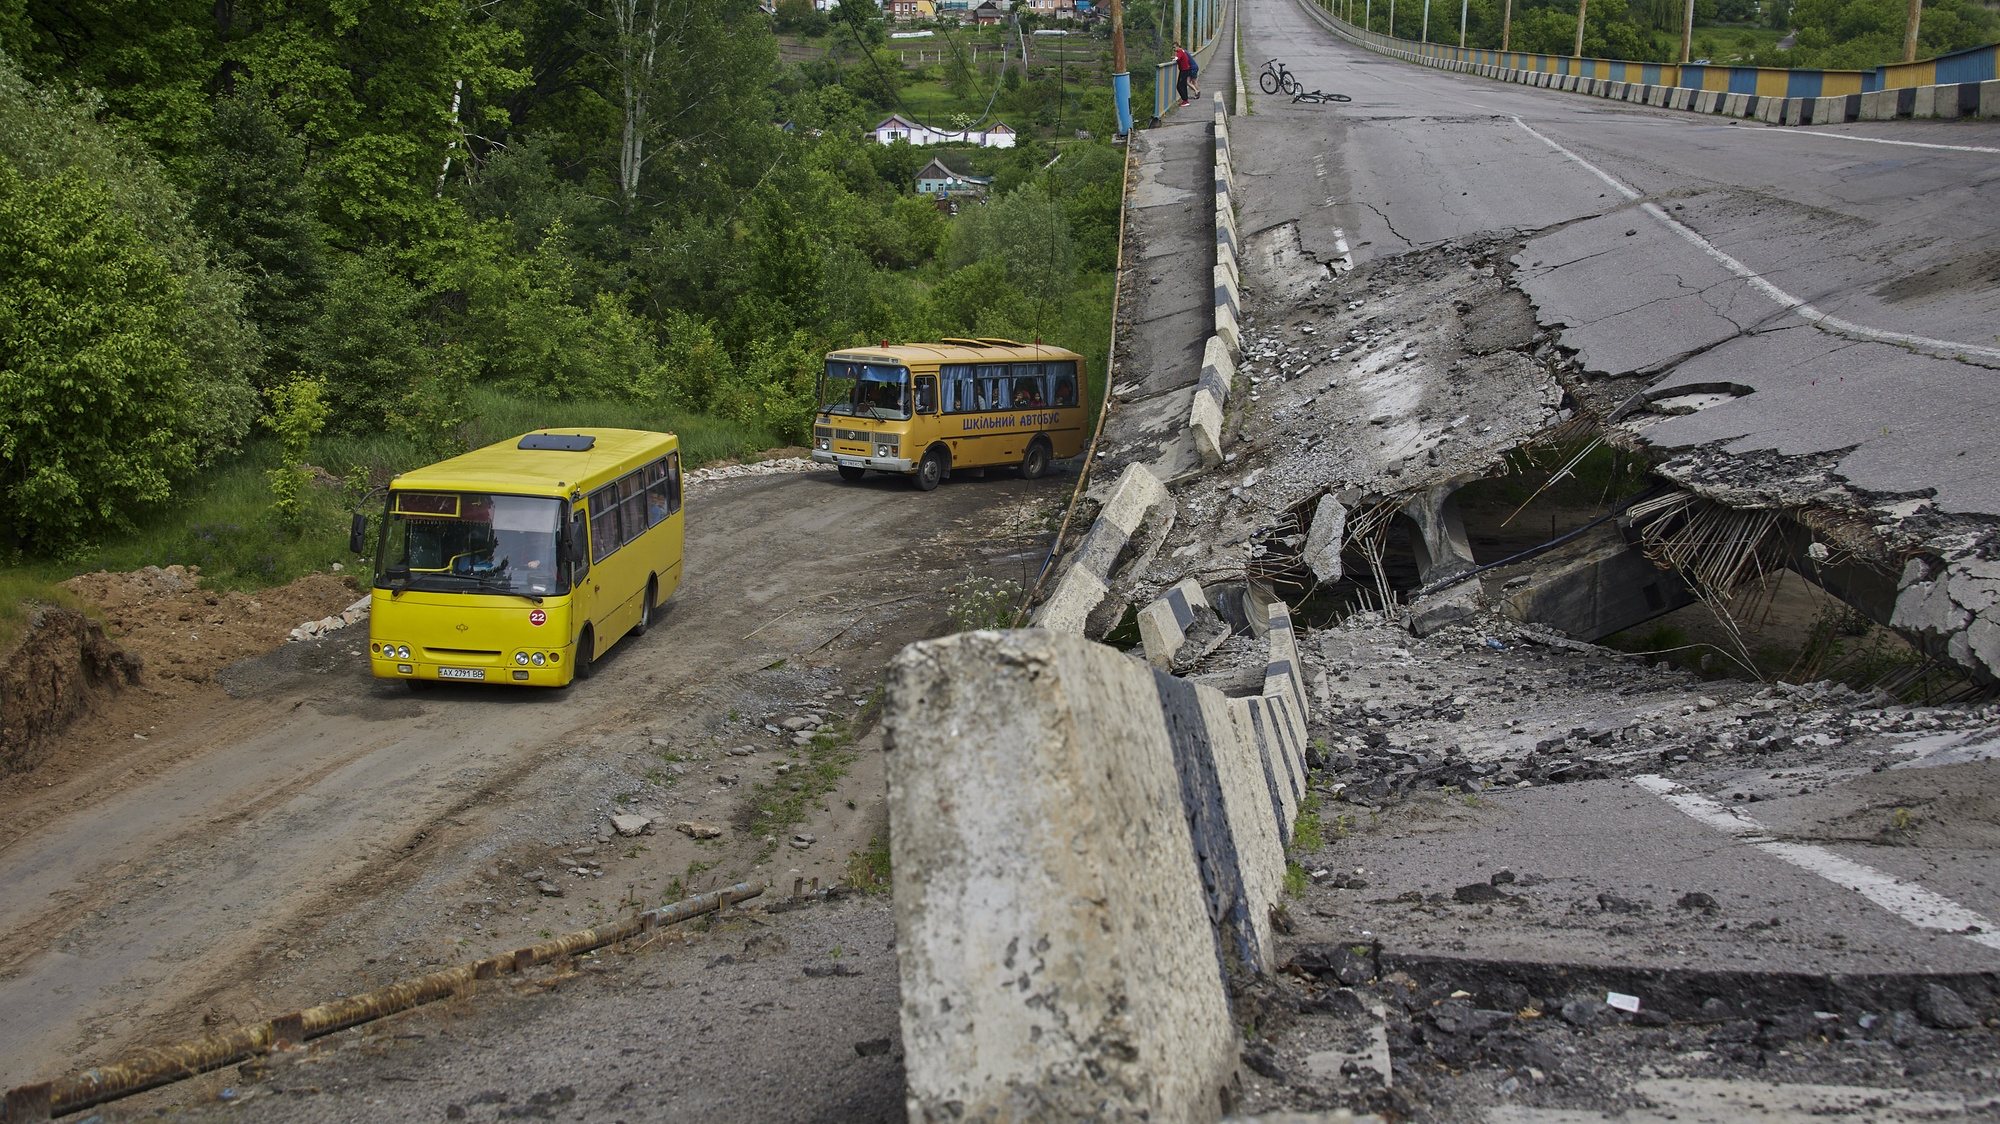 epa09987324 School buses carrying Ukrainian refugees drive past a damaged bridge near Kharkiv, Ukraine, 30 May 2022 (issued 31 May 2022). More than one thousand civilians were evacuated from both occupied and frontline territories. Russian troops entered Ukraine on 24 February, starting a conflict that has wrought havoc and triggered a humanitarian crisis. According to data released by the United Nations refugee agency UNHCR on 29 May, over 6.8 million people have fled Ukraine since Russian troops entered the country on 24 February 2022.  EPA/SERGEY KOZLOV